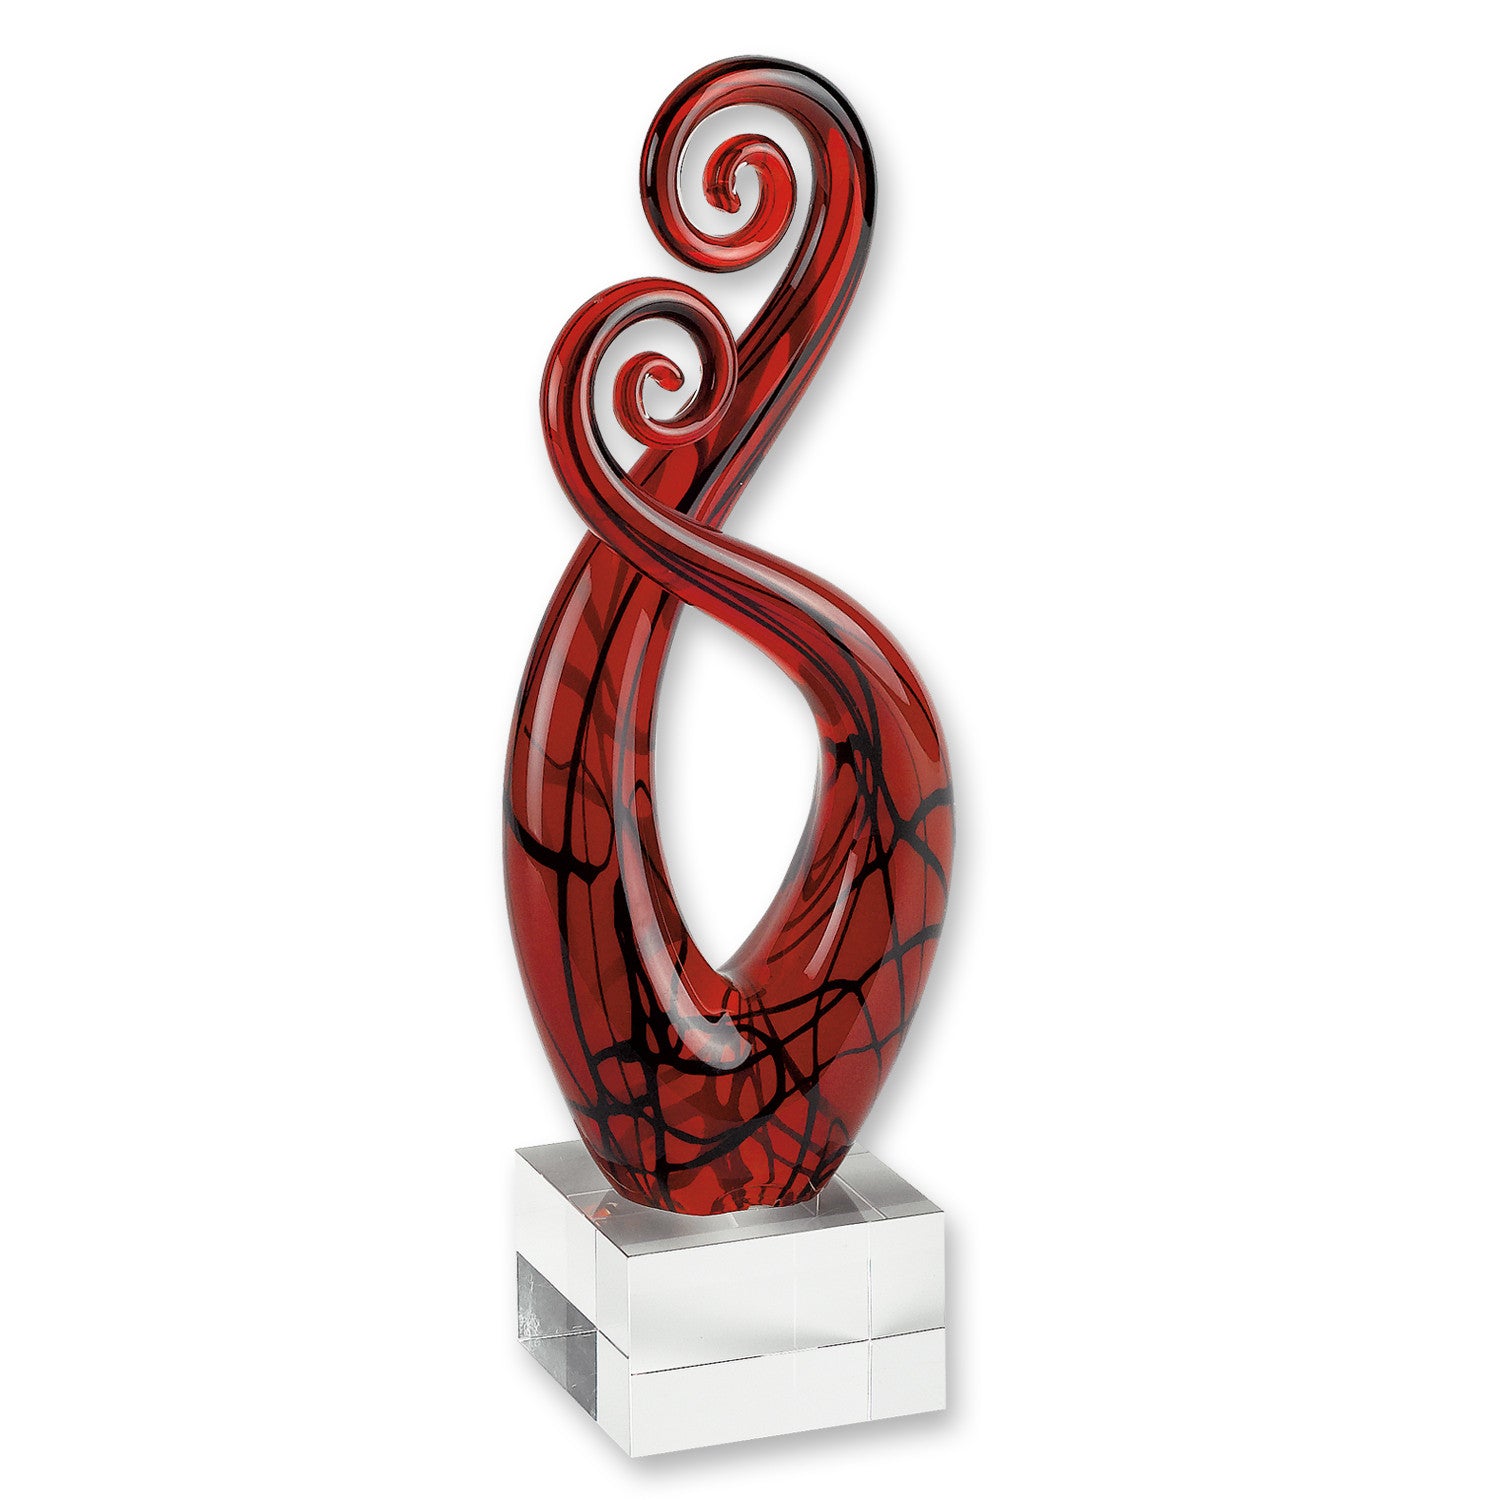 13" Clear Burgundy and Black Murano Glass Modern Abstract Tabletop Sculpture